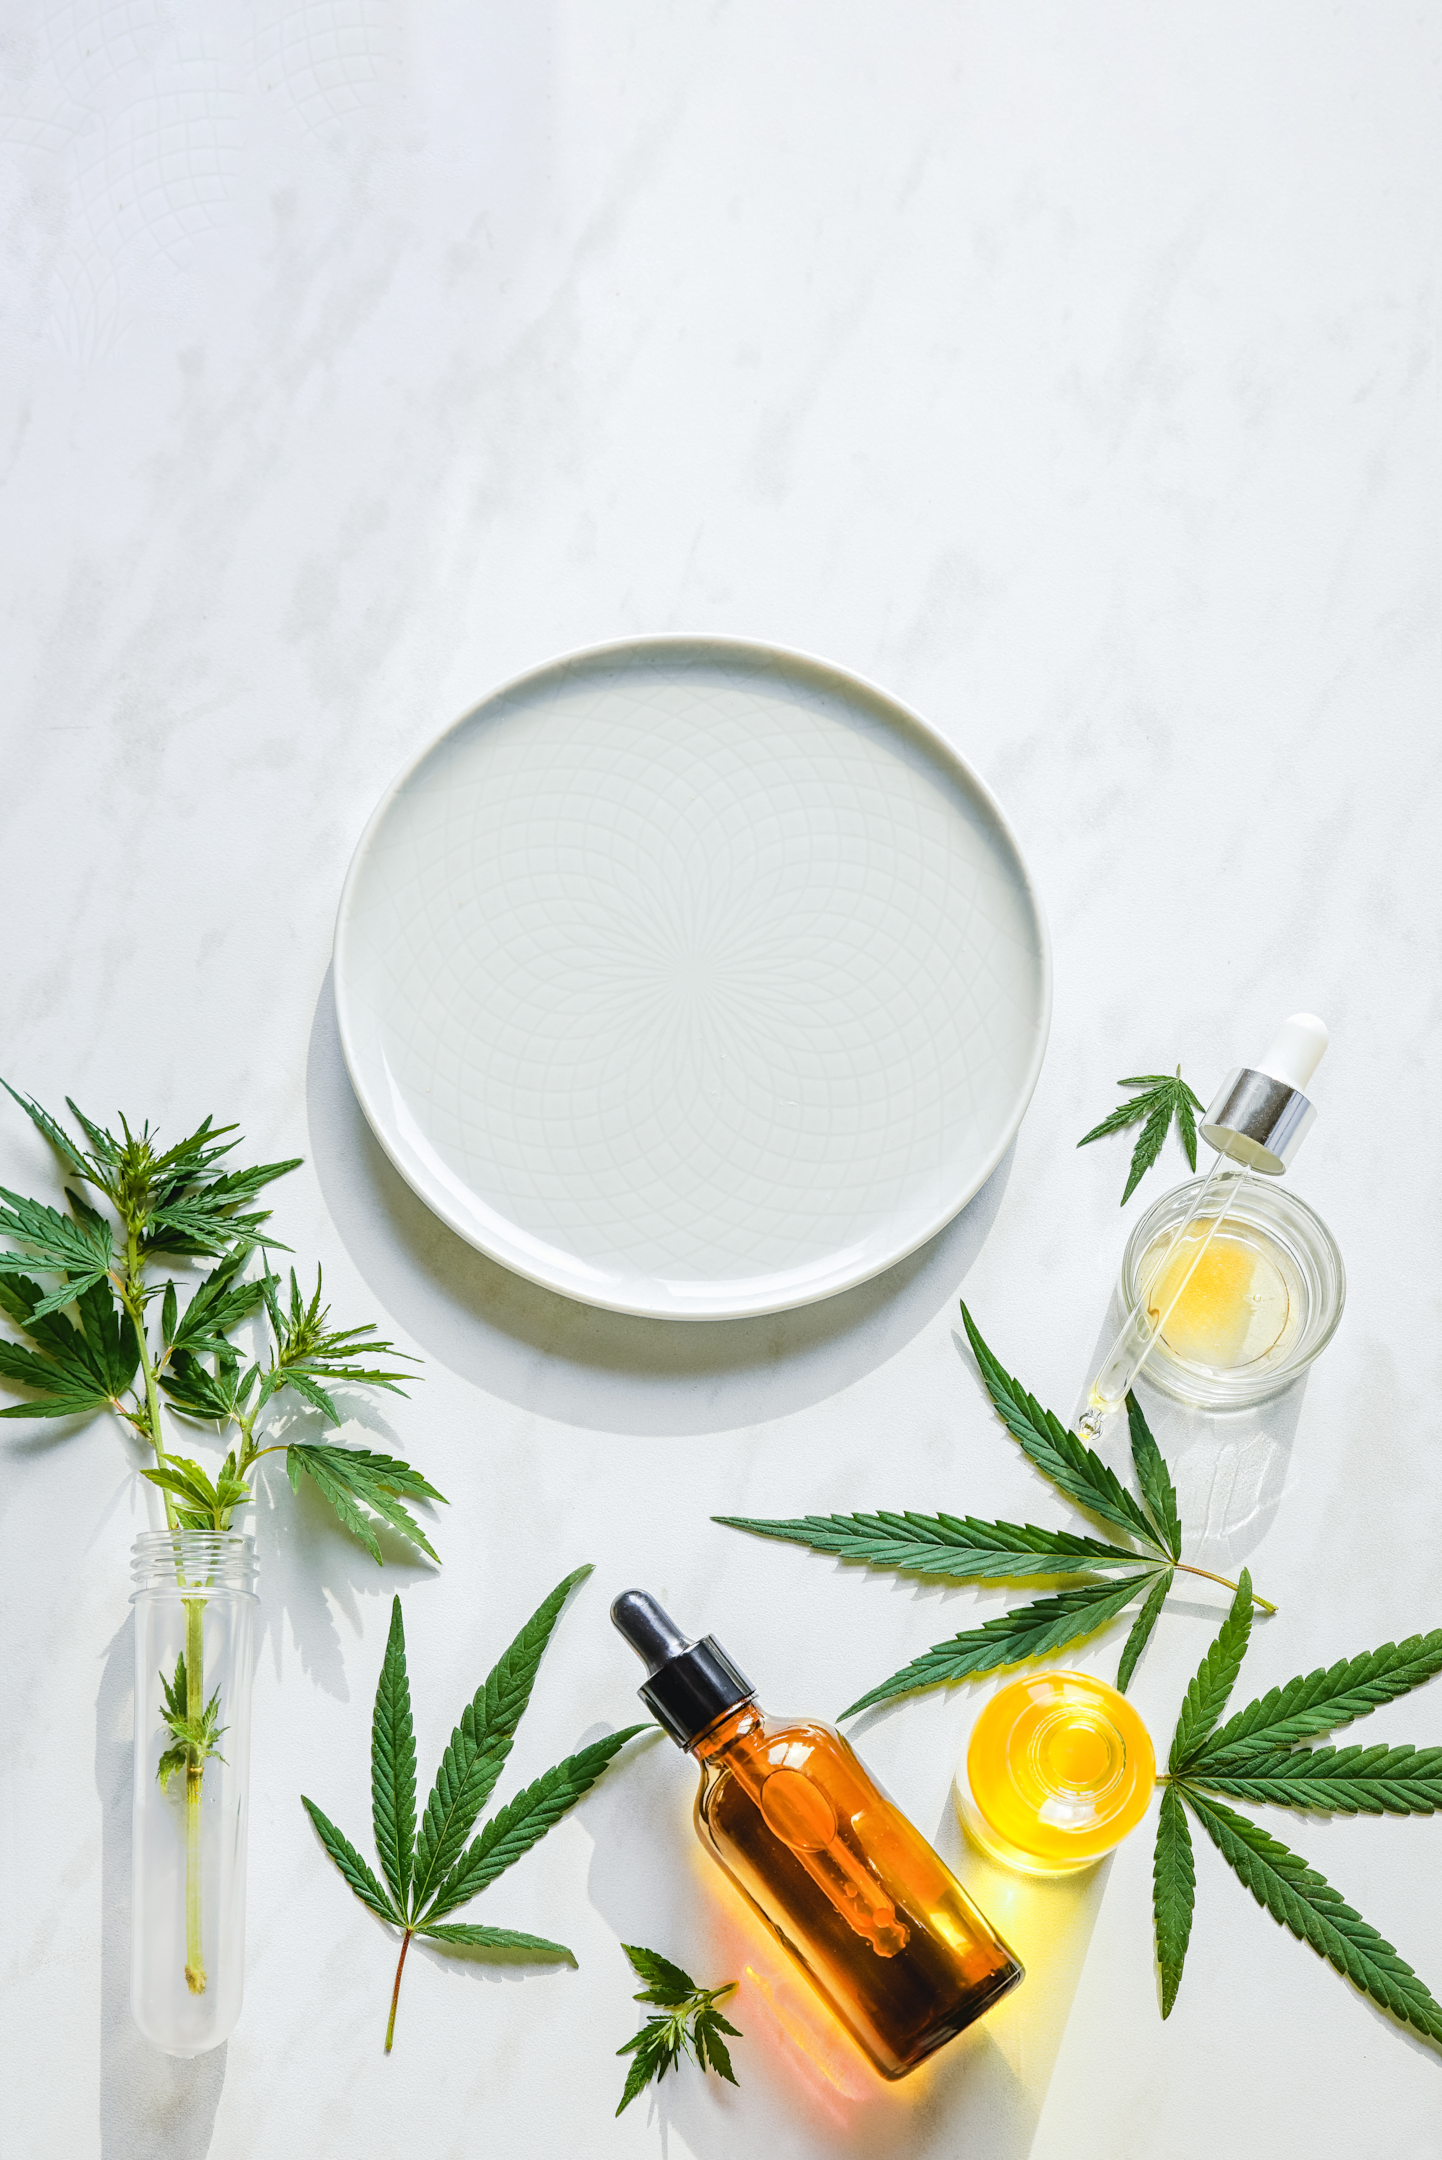 Whether Delta 8 edibles, CBN products, Delta 9 vapes or edibles, CBD tinctures or creams, or any other Delta 8 product, they're not meant to treat or cure chronic pain or other health conditions similar or more severe than chronic pain.